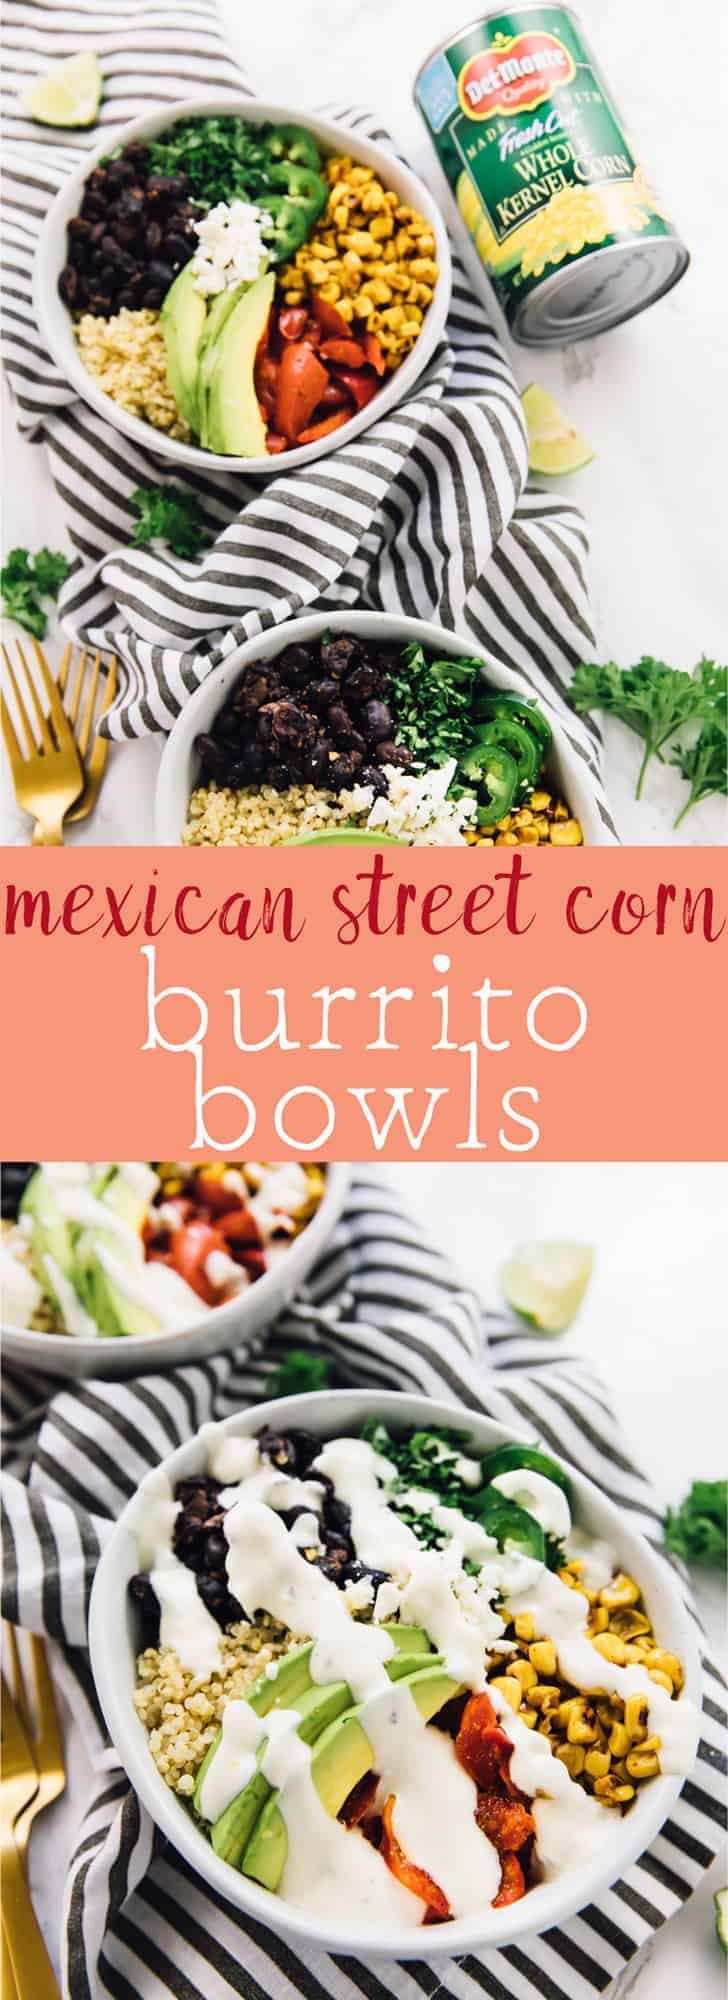 These Mexican Street Corn Burrito Bowls are the healthier, but just as tasty, versions of your favourite burrito! The bowls are drizzled with a creamy and smooth lime crema for a filling and delicious dish that’s perfect for meal prep! via https://jessicainthekitchen.com 